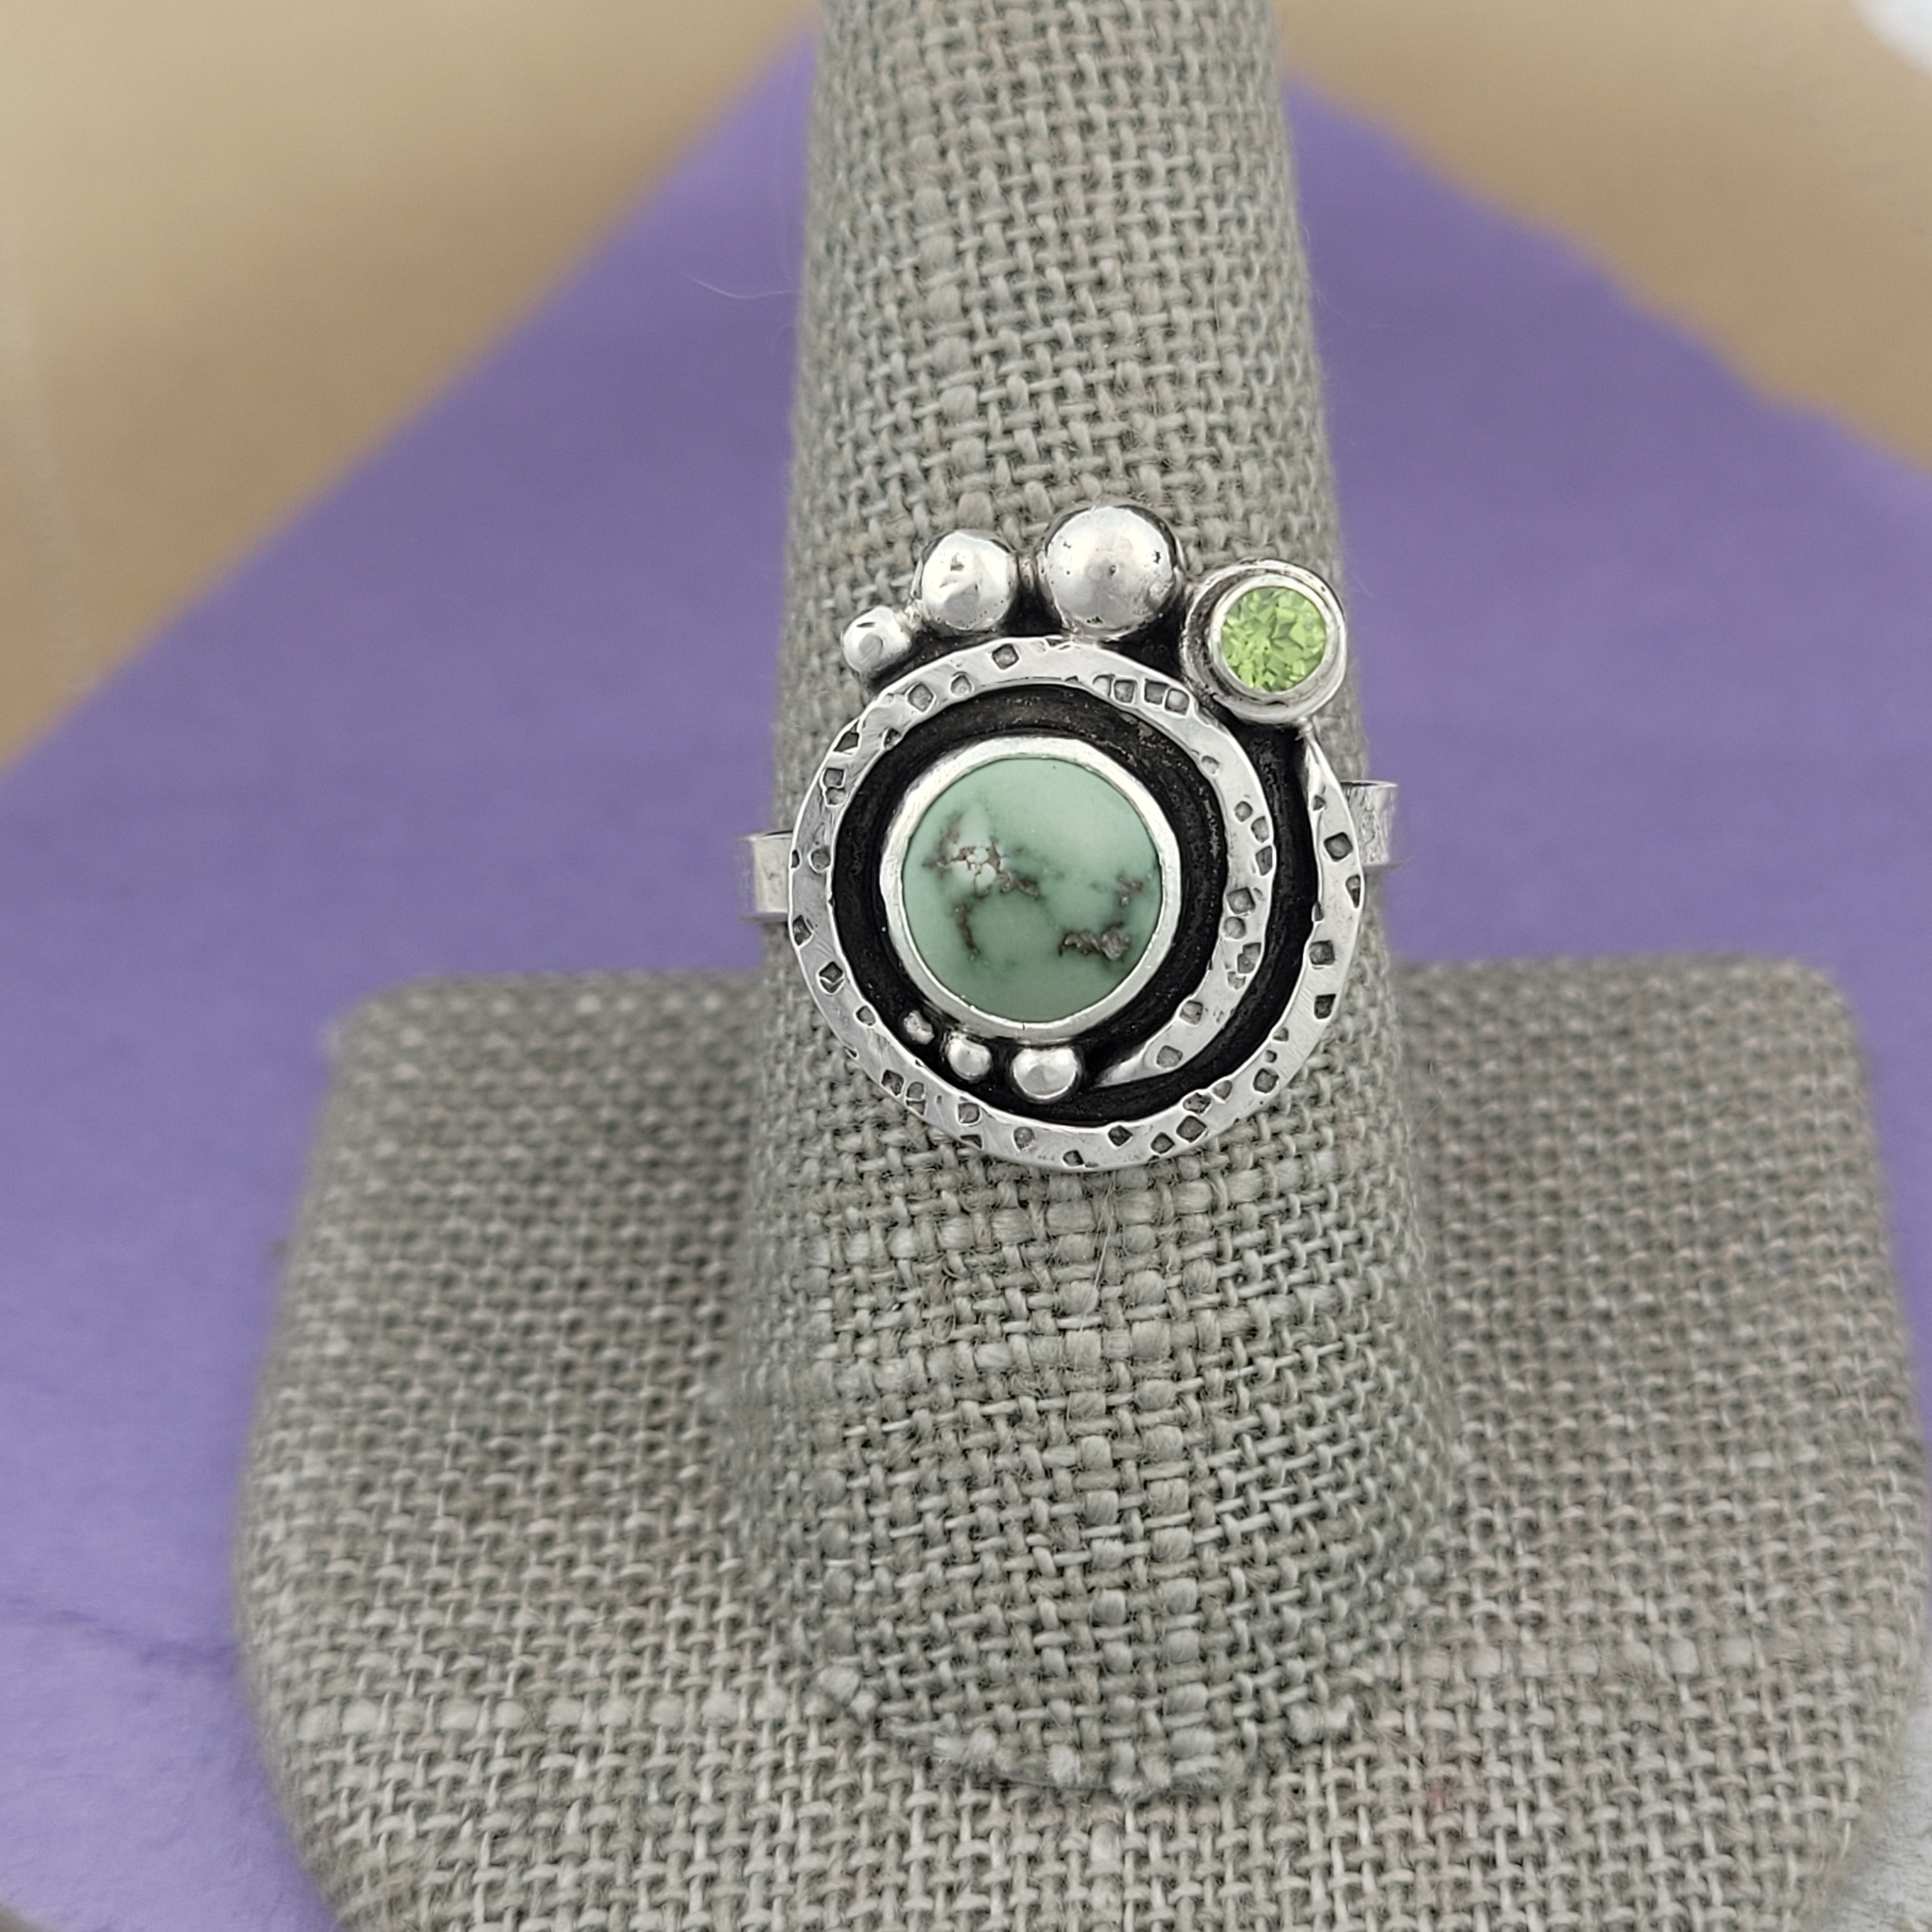 Size 9, Turquoise and Peridot Sterling Silver Ring